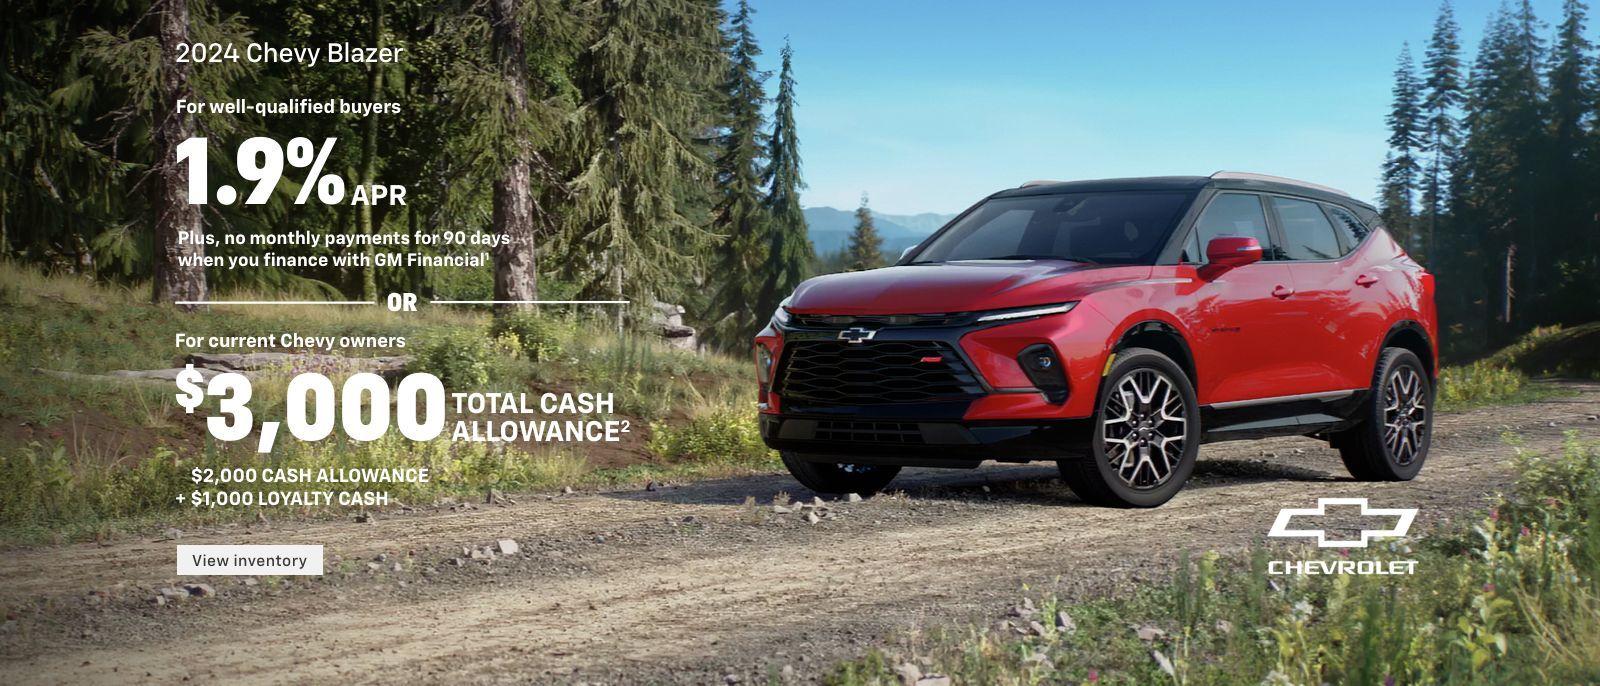 2024 Chevy Blazer. For well-qualified buyers 1.9% APR + no monthly payments for 90 days when you finance with GM Financial. Or, for current Chevy owners $3,000 total cash allowance. $2,000 cash allowance + $1,000 loyalty cash.